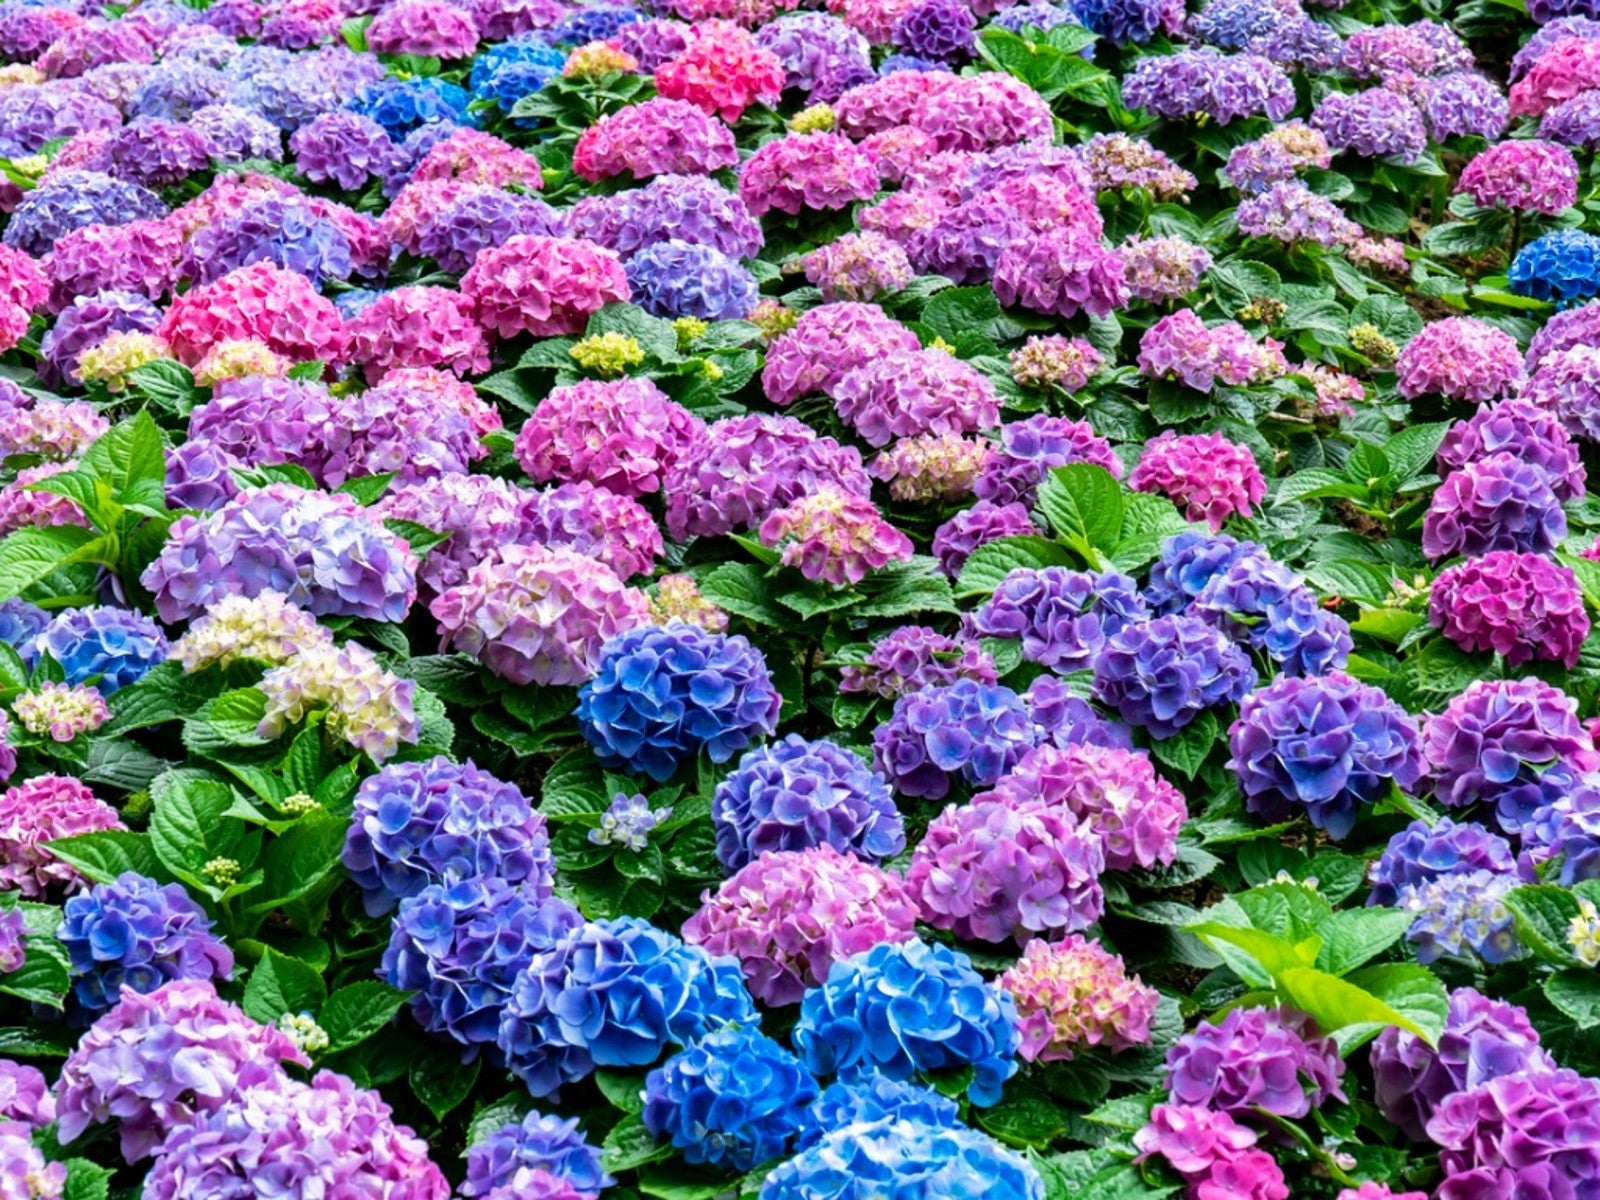 How To Grow And Care For Hydrangeas